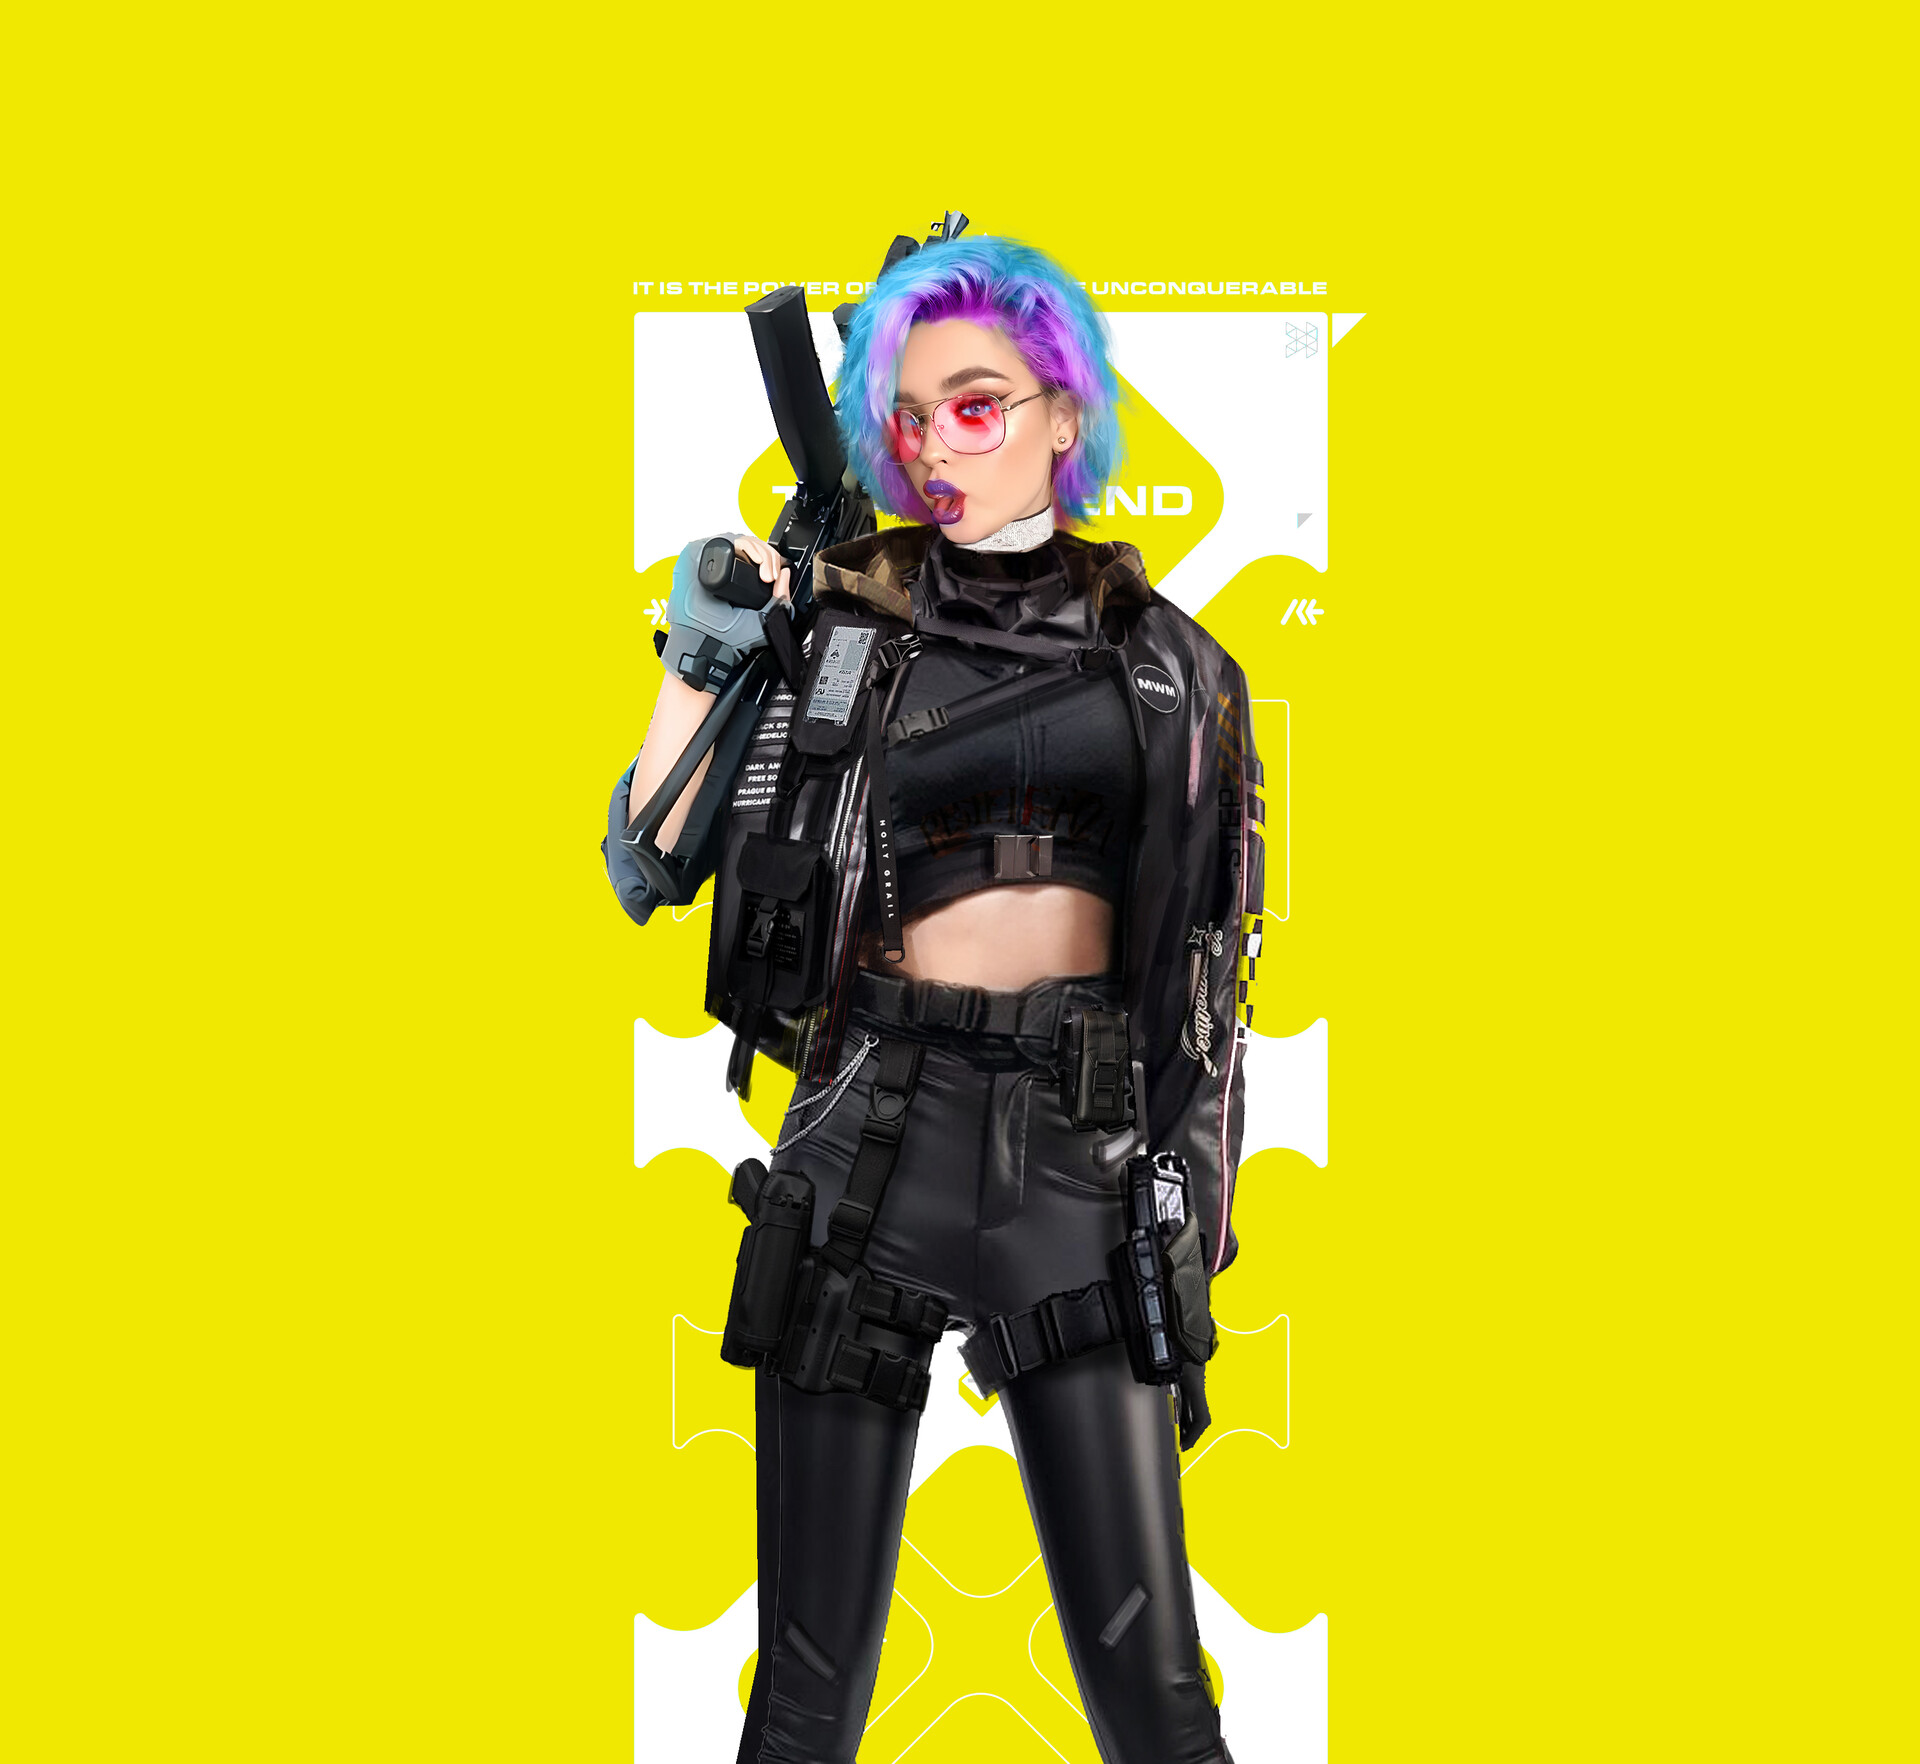 General 1920x1764 digital art illustration artwork weapon girls with guns character design  women women with glasses black clothing simple background yellow background short hair pink hair